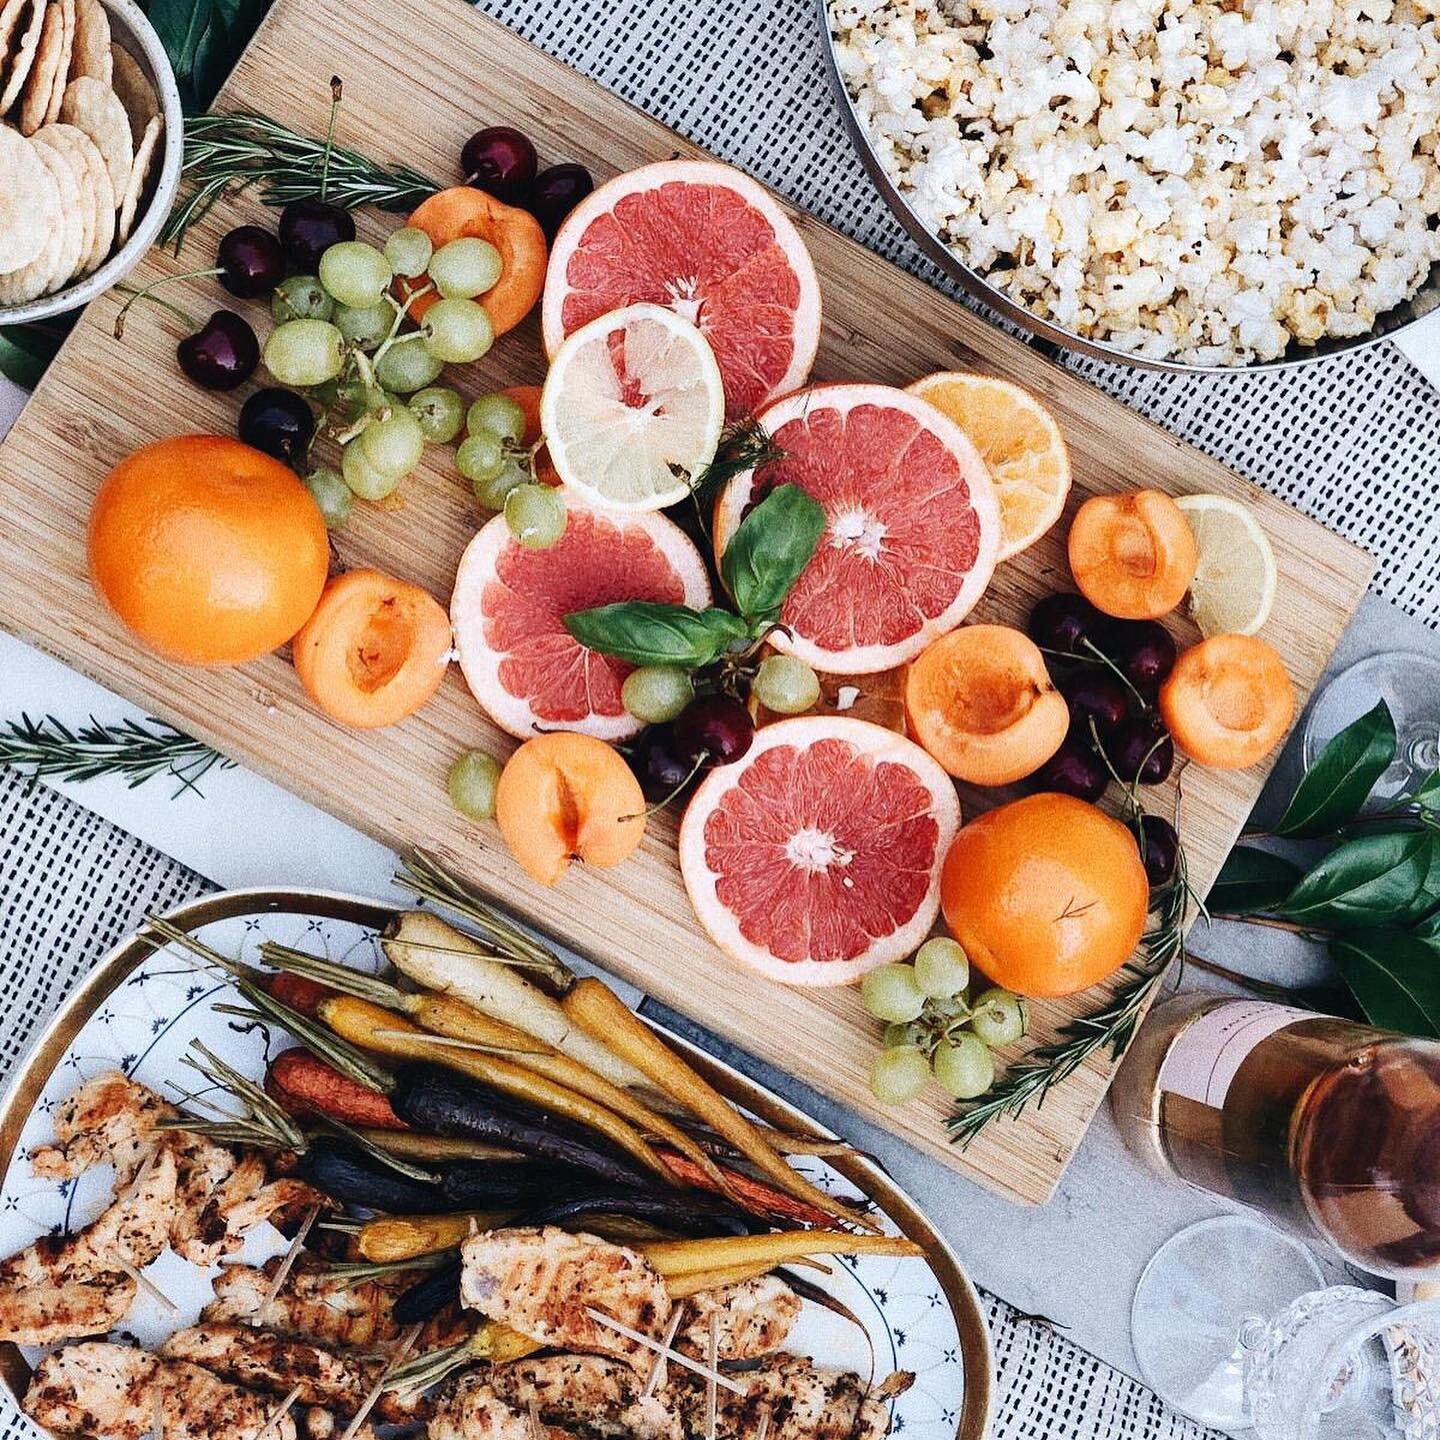 I have a serious love for creating seasonal spreads to enjoy with friends 🍒🍊🍋🍑